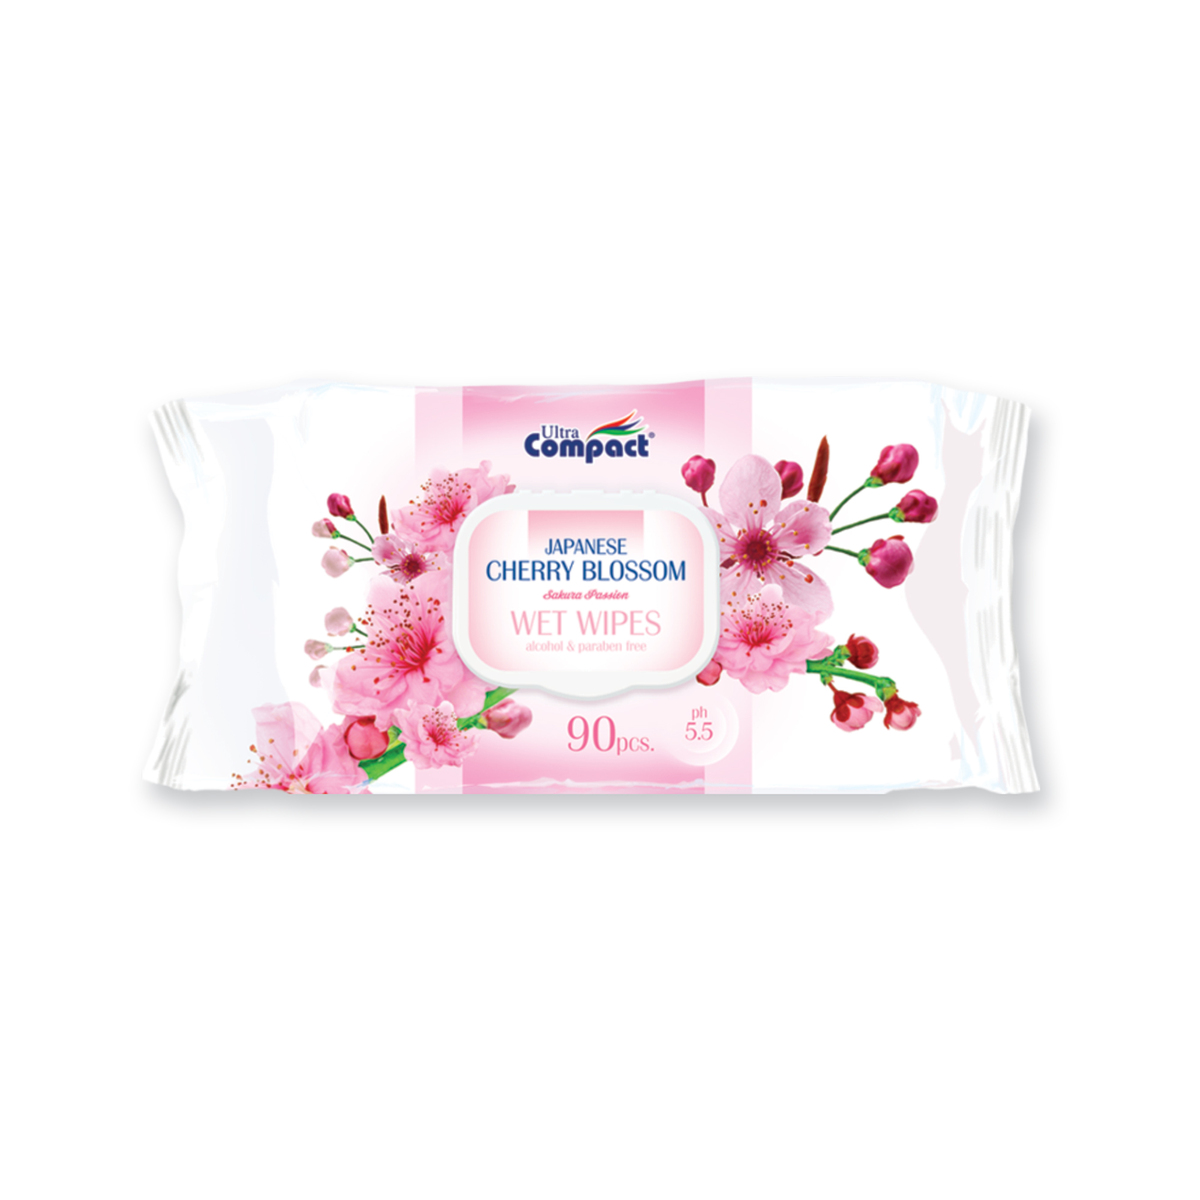 Ultra compact  Wet Wipe Japanese Cherry Blossom 90pcs